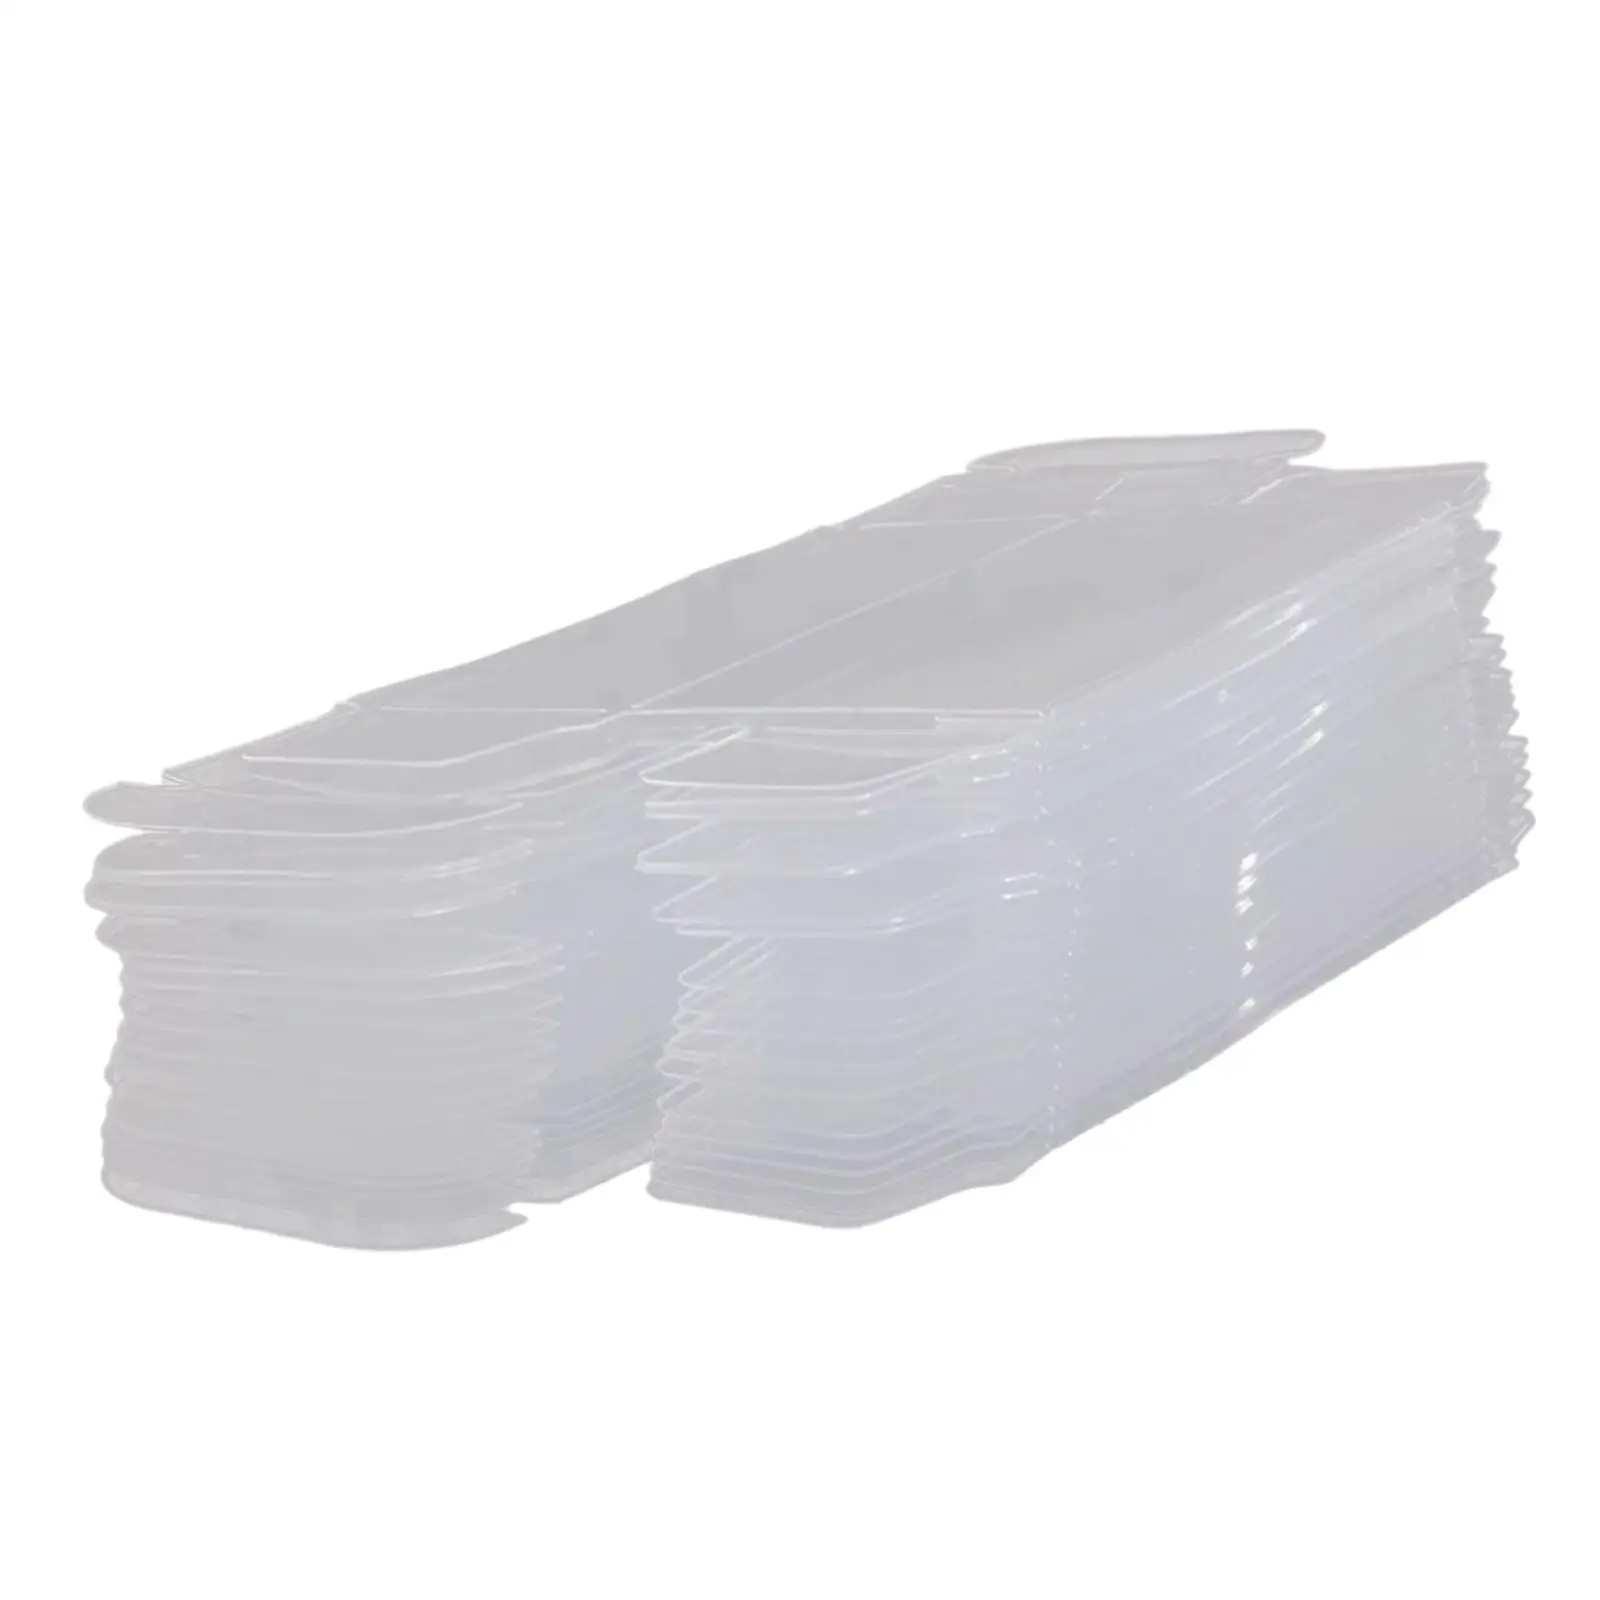 50 Pieces PVC Clear Box for Miniature Figurines Collectibles Dolls